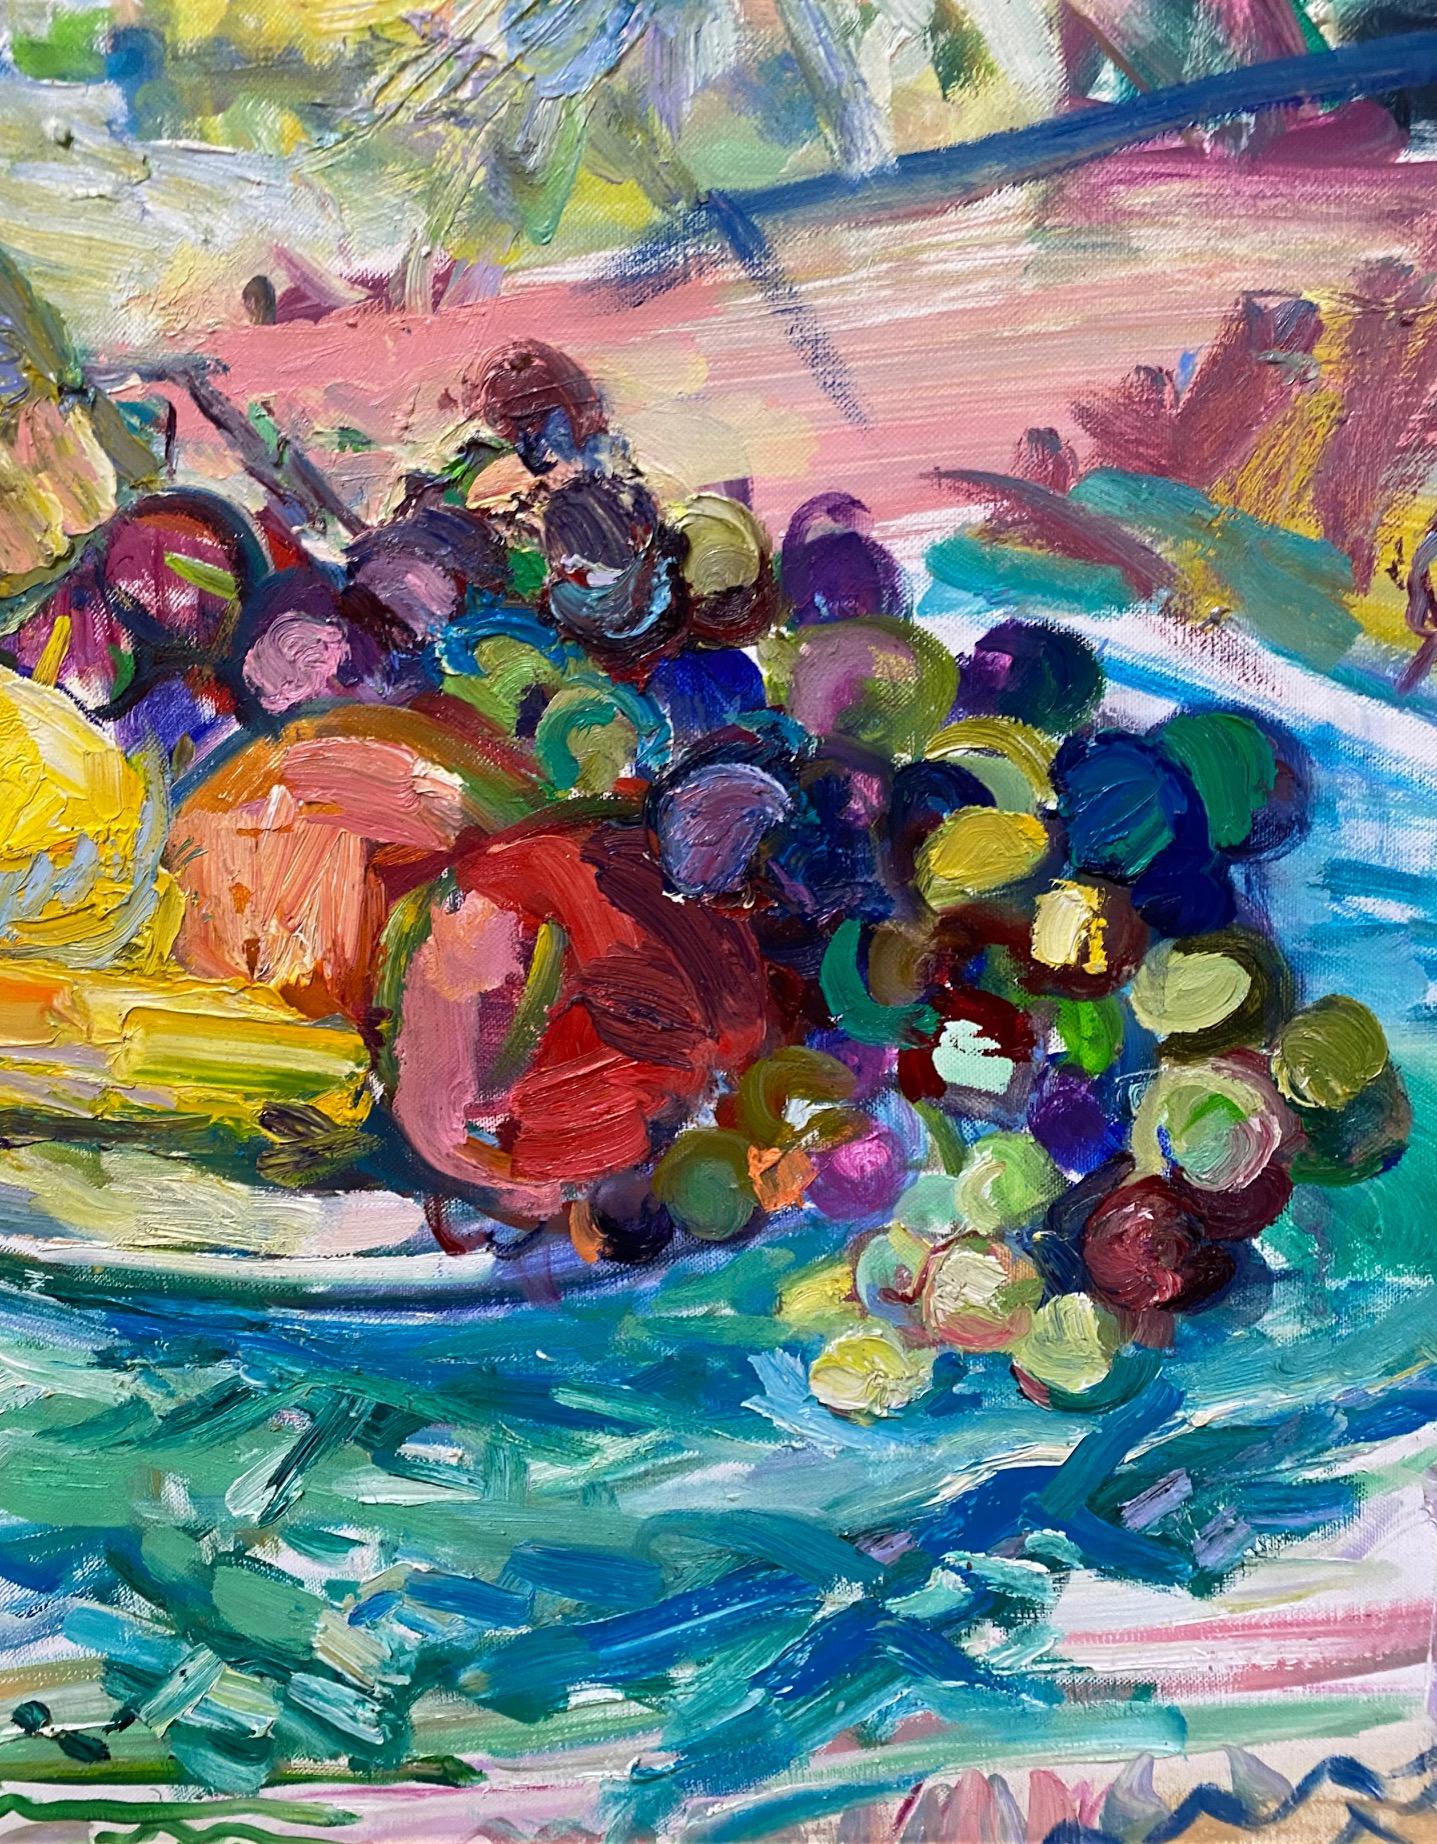 Afternoon Wine and Fruit, original 38x38 abstract expressionist still life - Abstract Expressionist Painting by Sonia Grineva